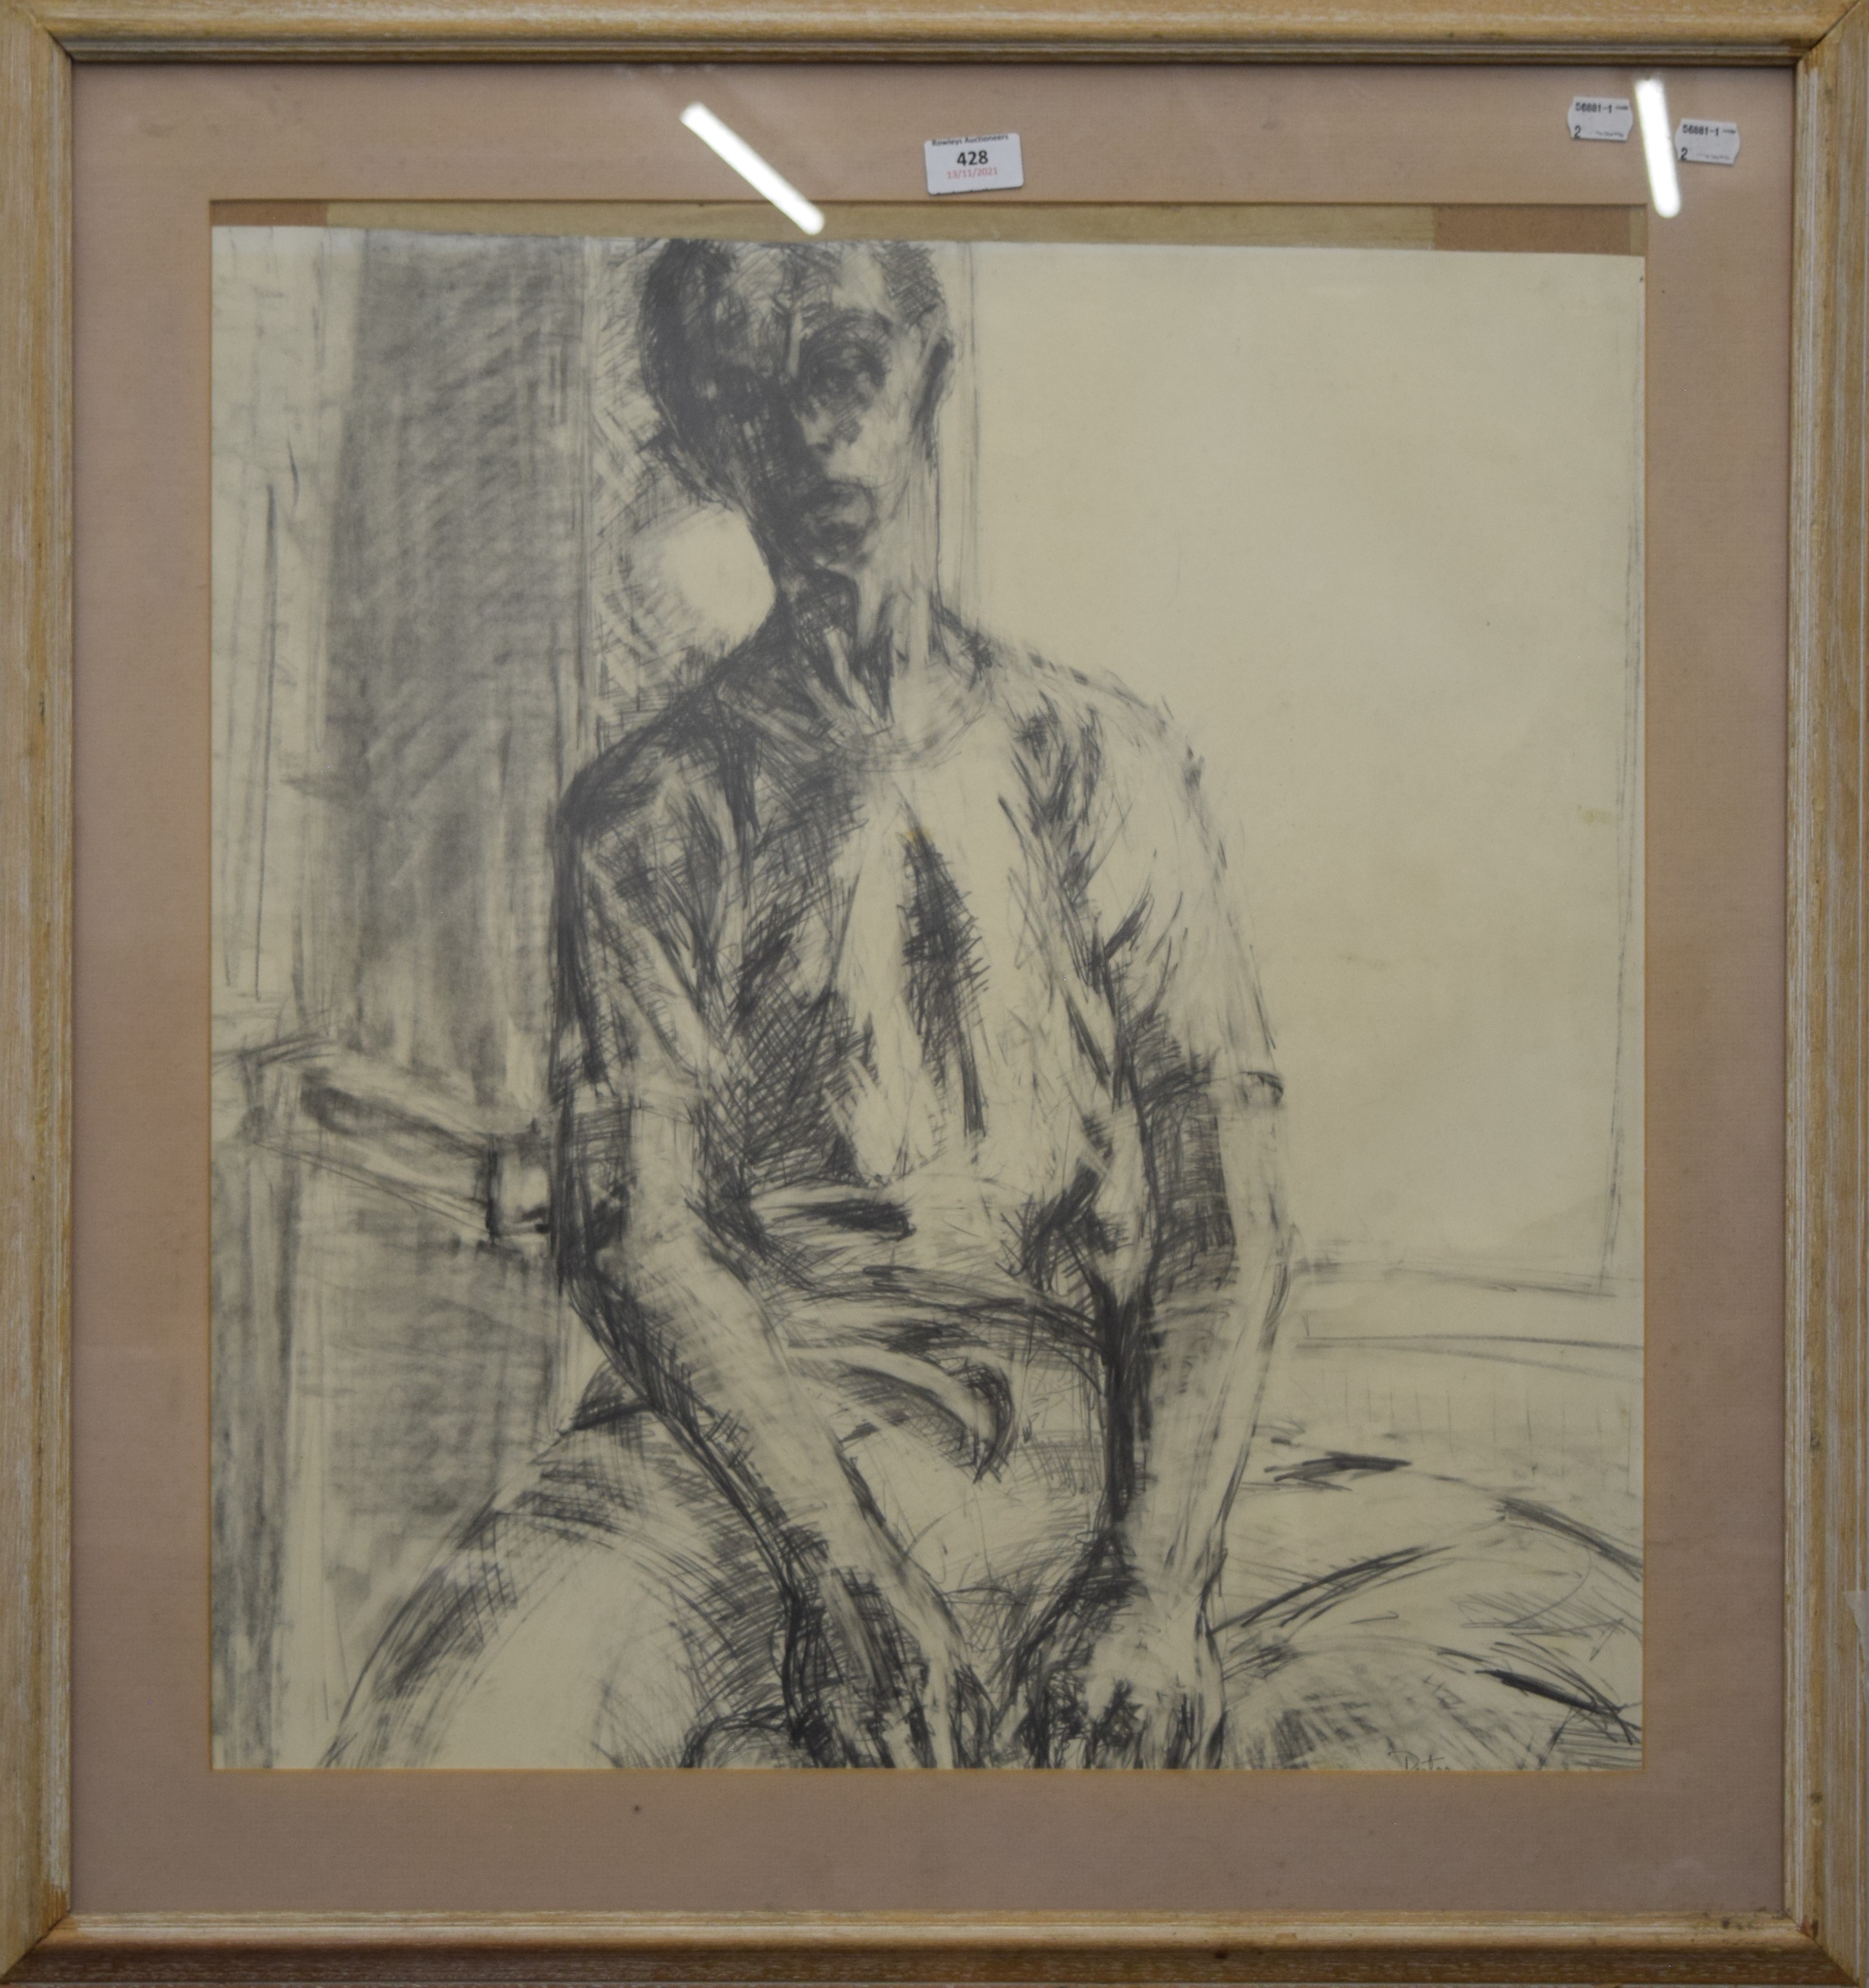 ALBERTO GIACOMETTI (1901-1966) Swiss, Study of a Seated Figure, pencil sketch, - Image 2 of 2